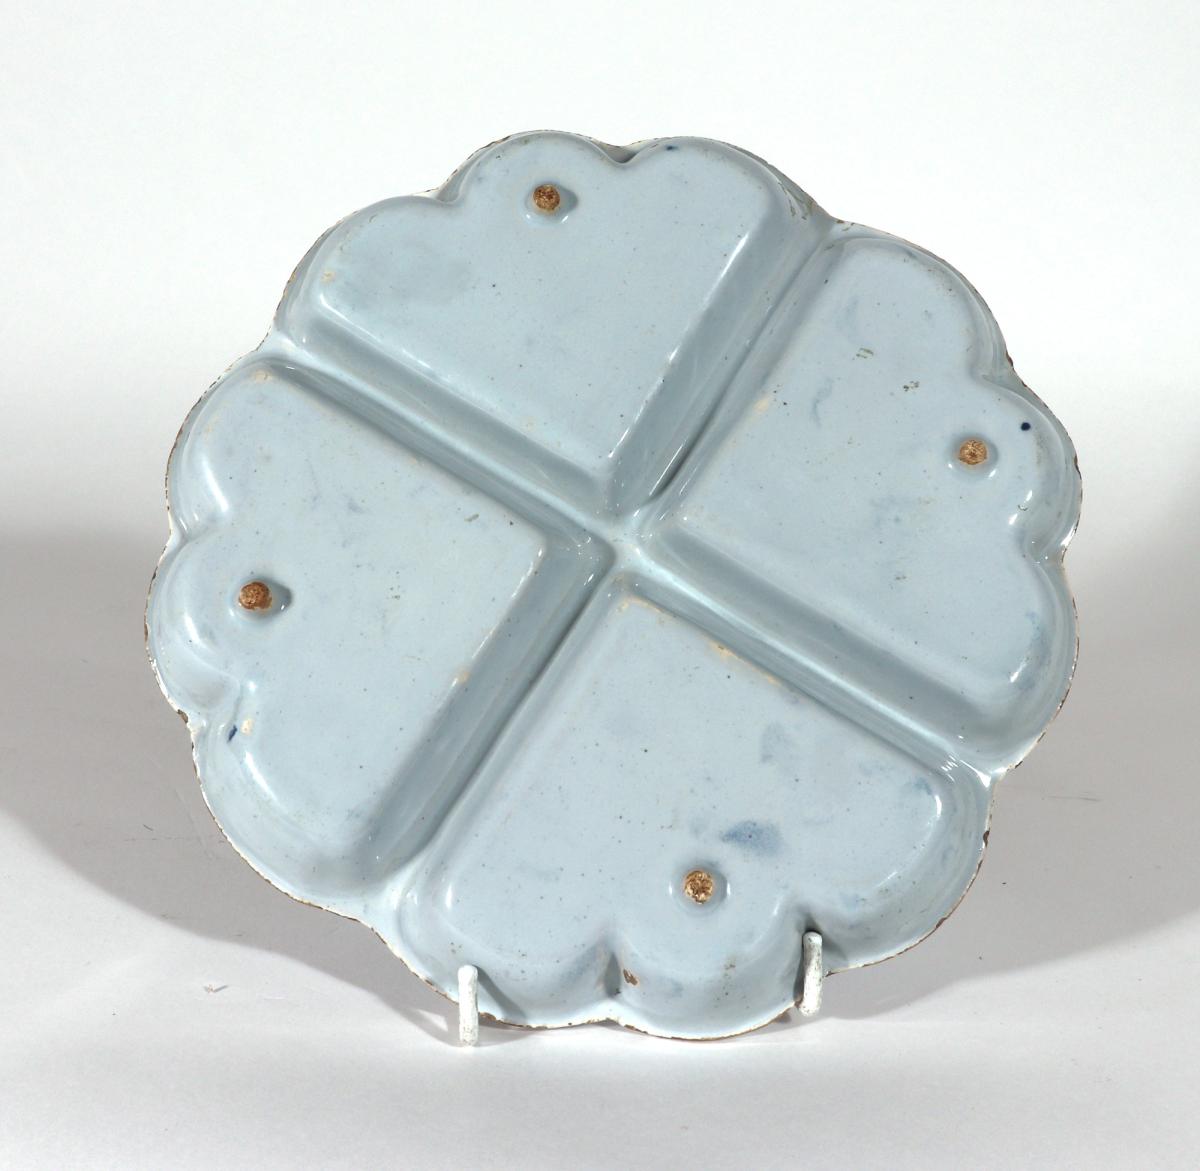 English Delftware Blue & White Sweetmeat Dish, London, Possibly Lambeth High Street, William Griffith's pottery. Circa 1750-60